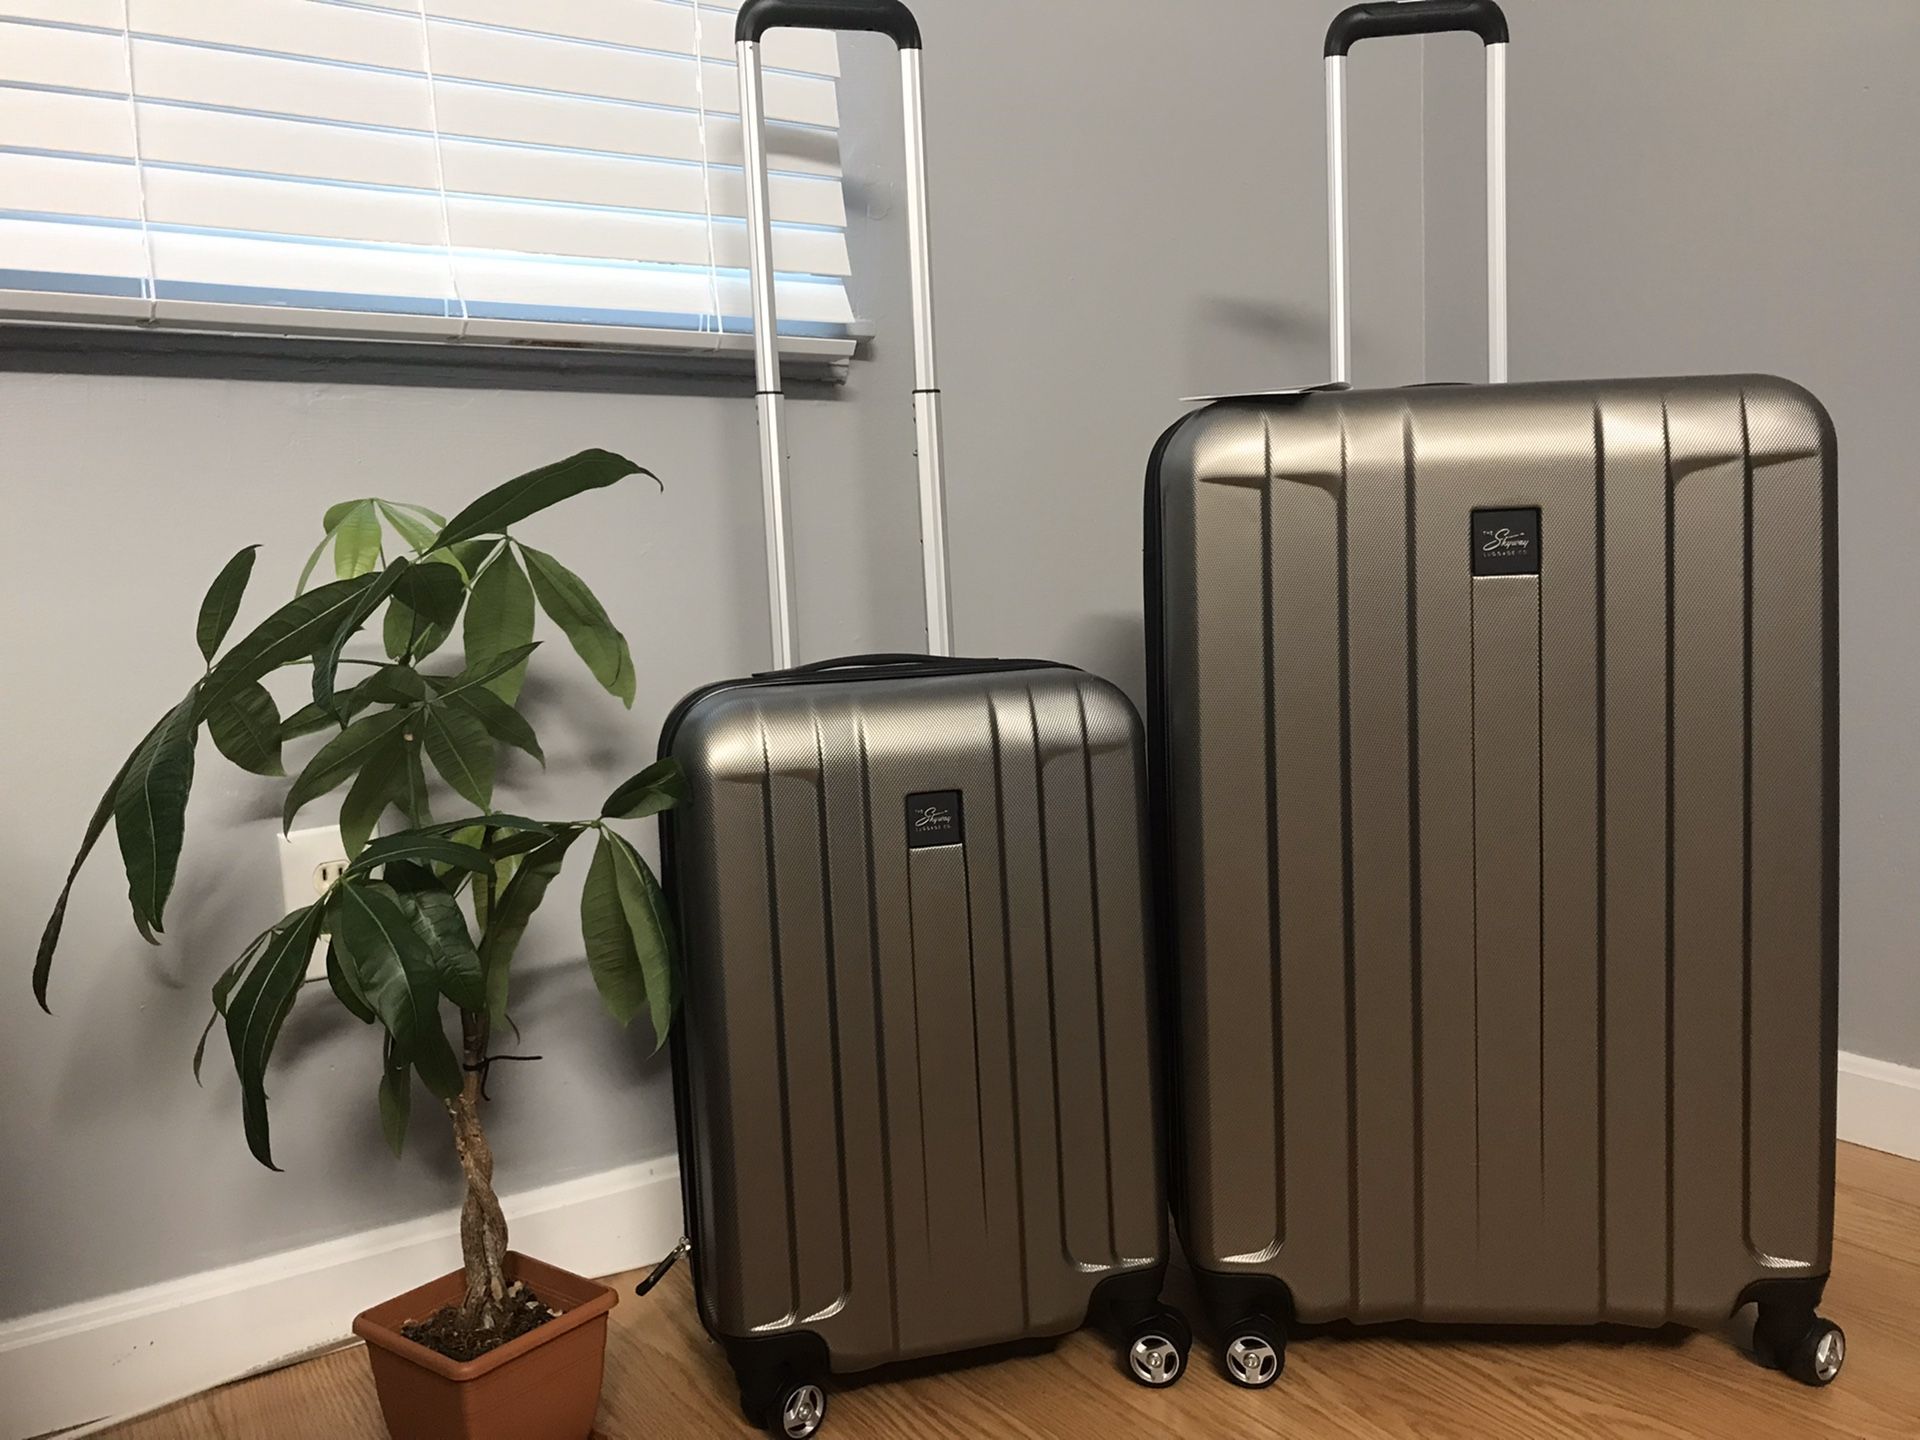 New Skyway luggage 2 PC , Gray color, hard side luggage